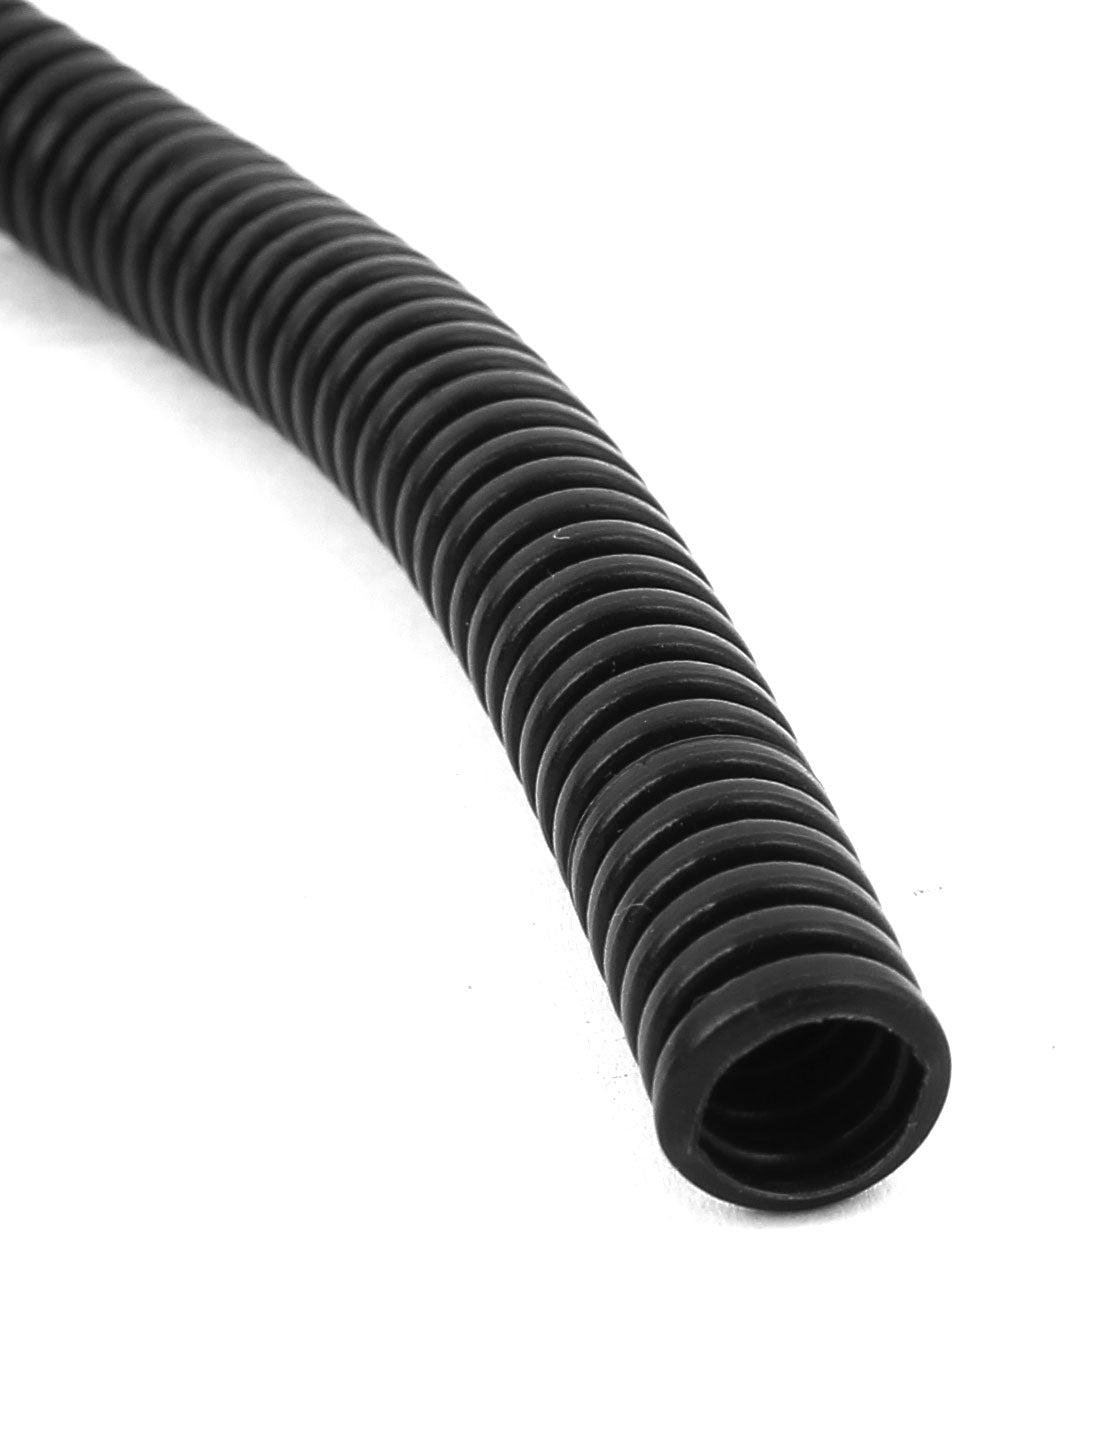 uxcell Uxcell 4.5 M 7 x 10 mm Plastic Flexible Corrugated Conduit Tube for Garden,Office Black